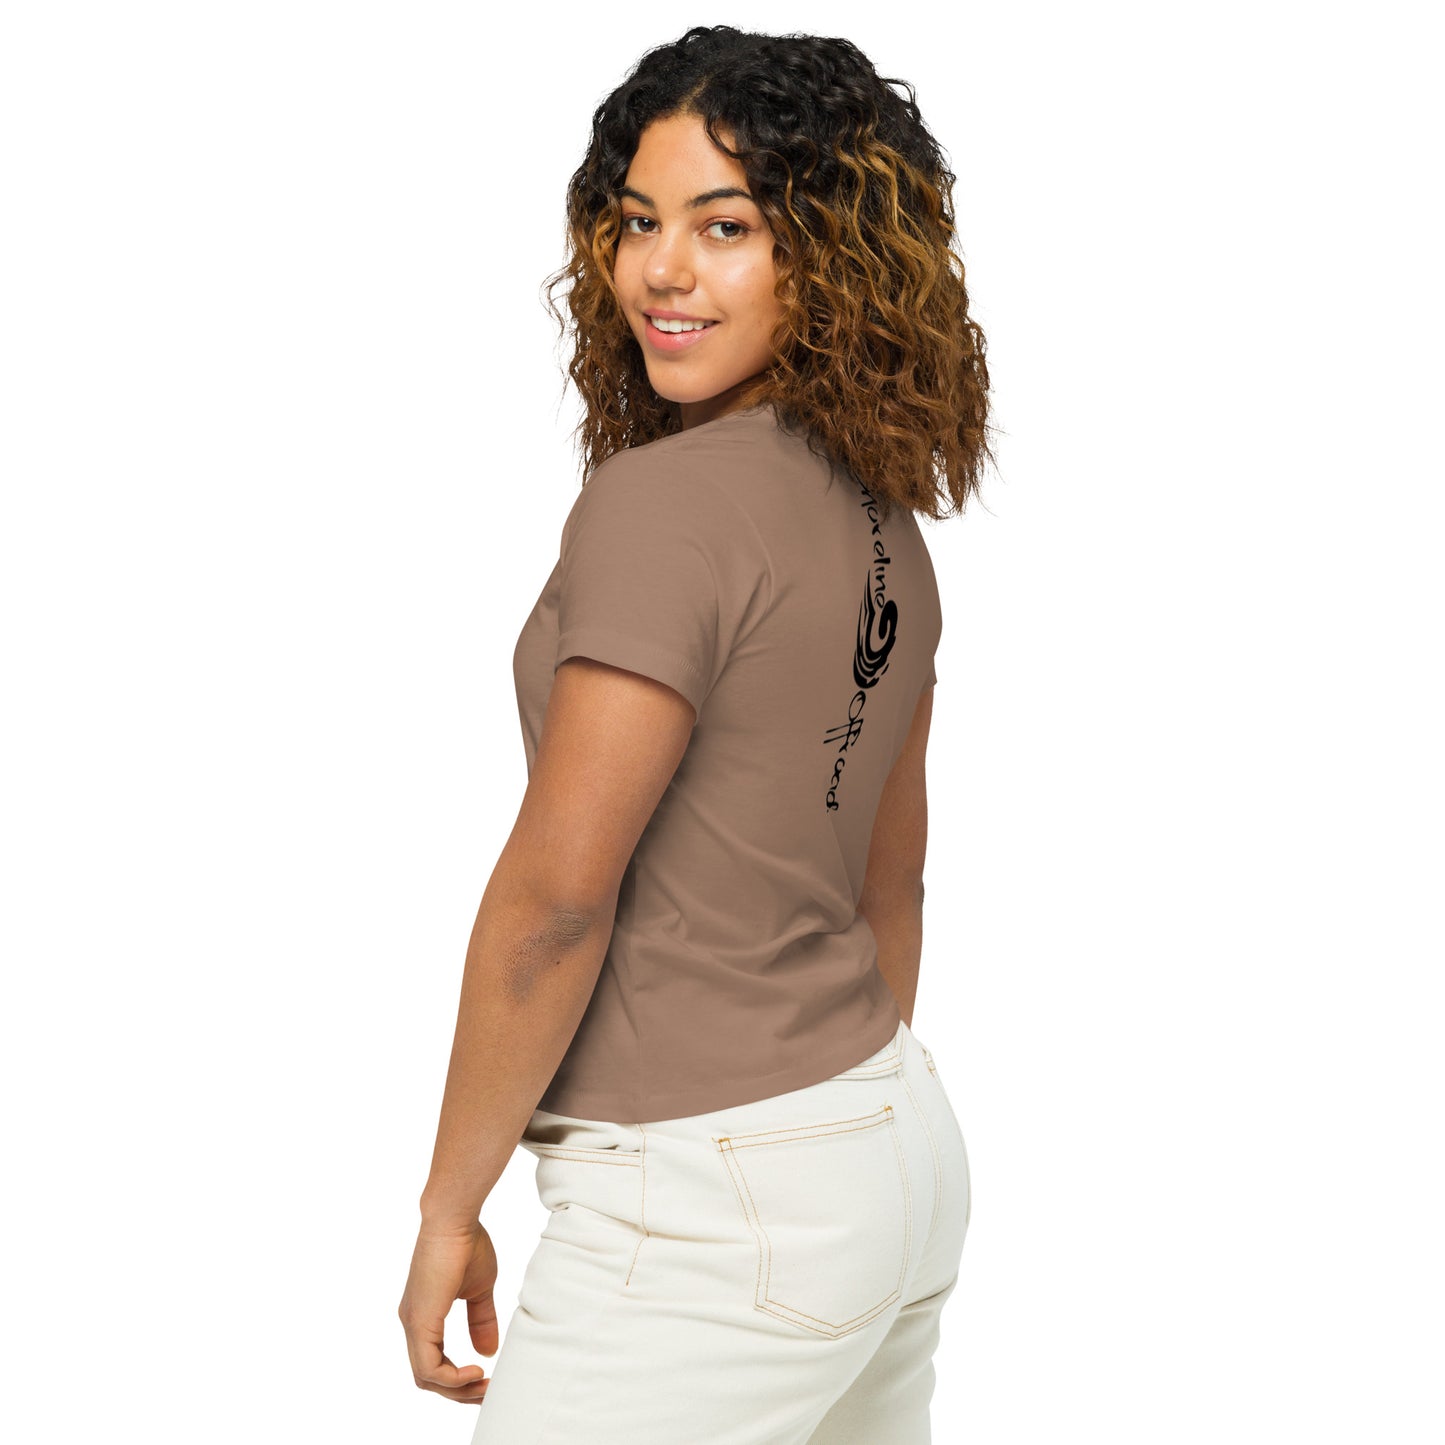 a woman wearing a brown shirt and white pants